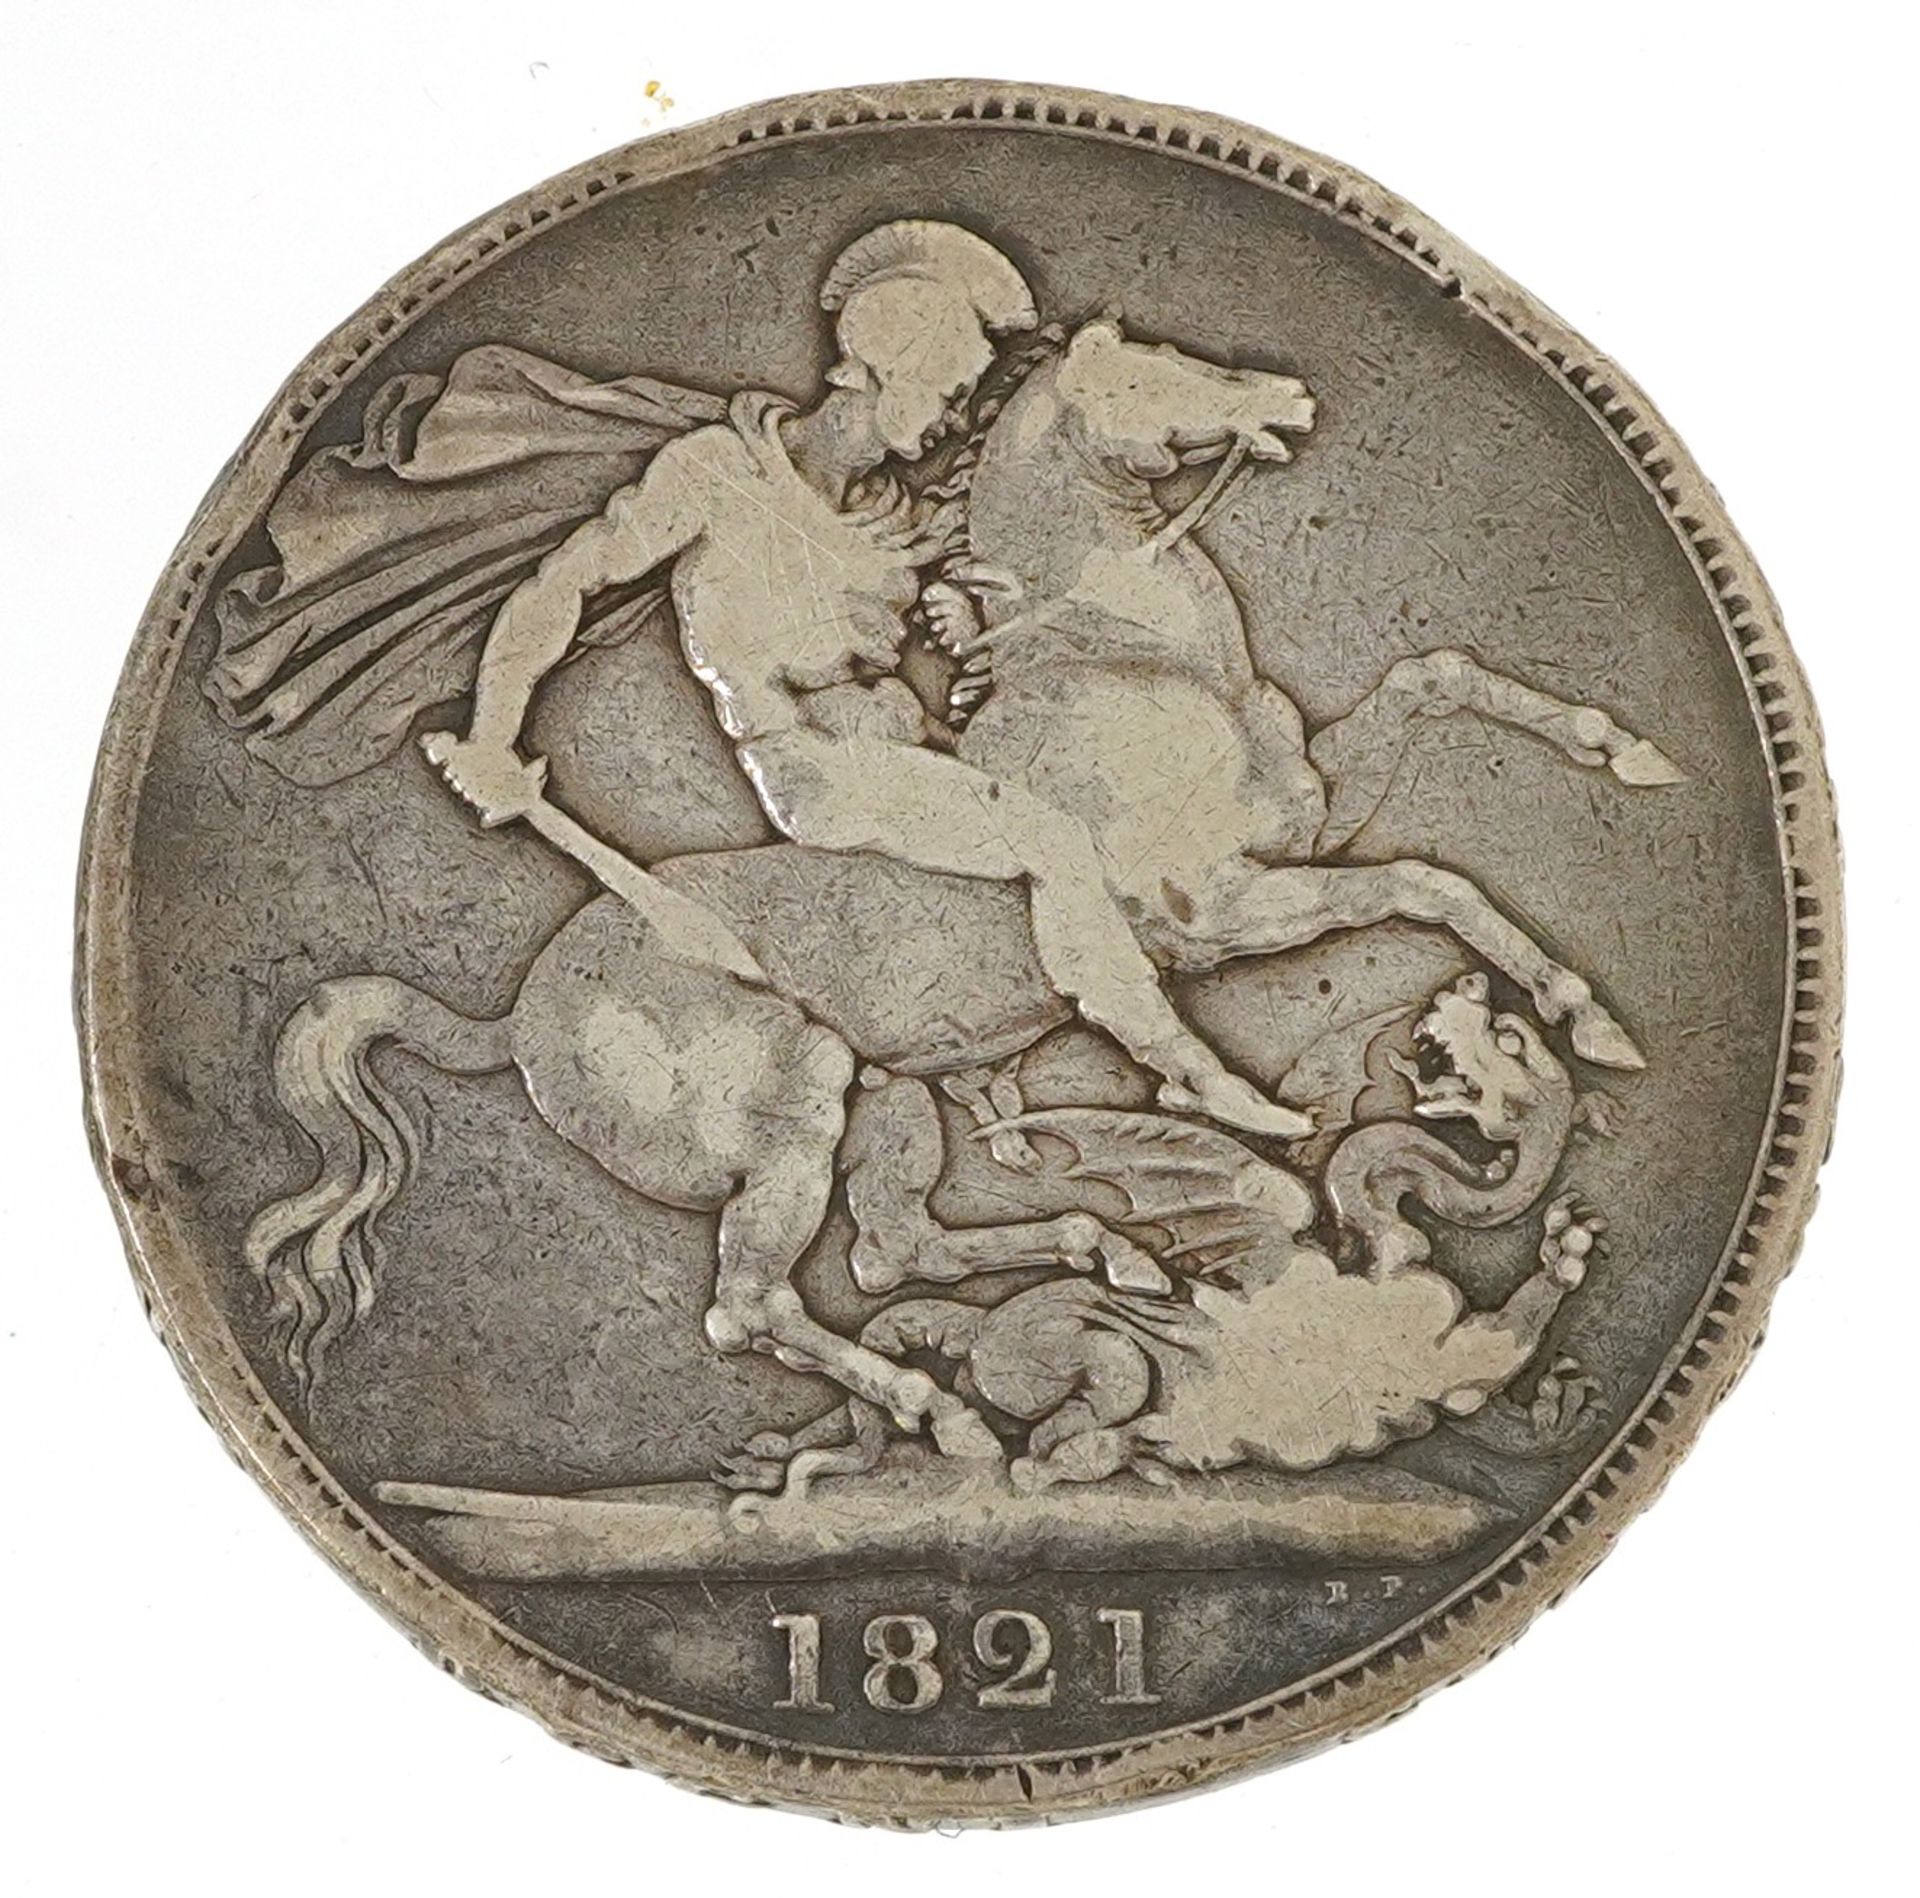 George III 1821 silver crown : For further information on this lot please visit Eastbourneauction.